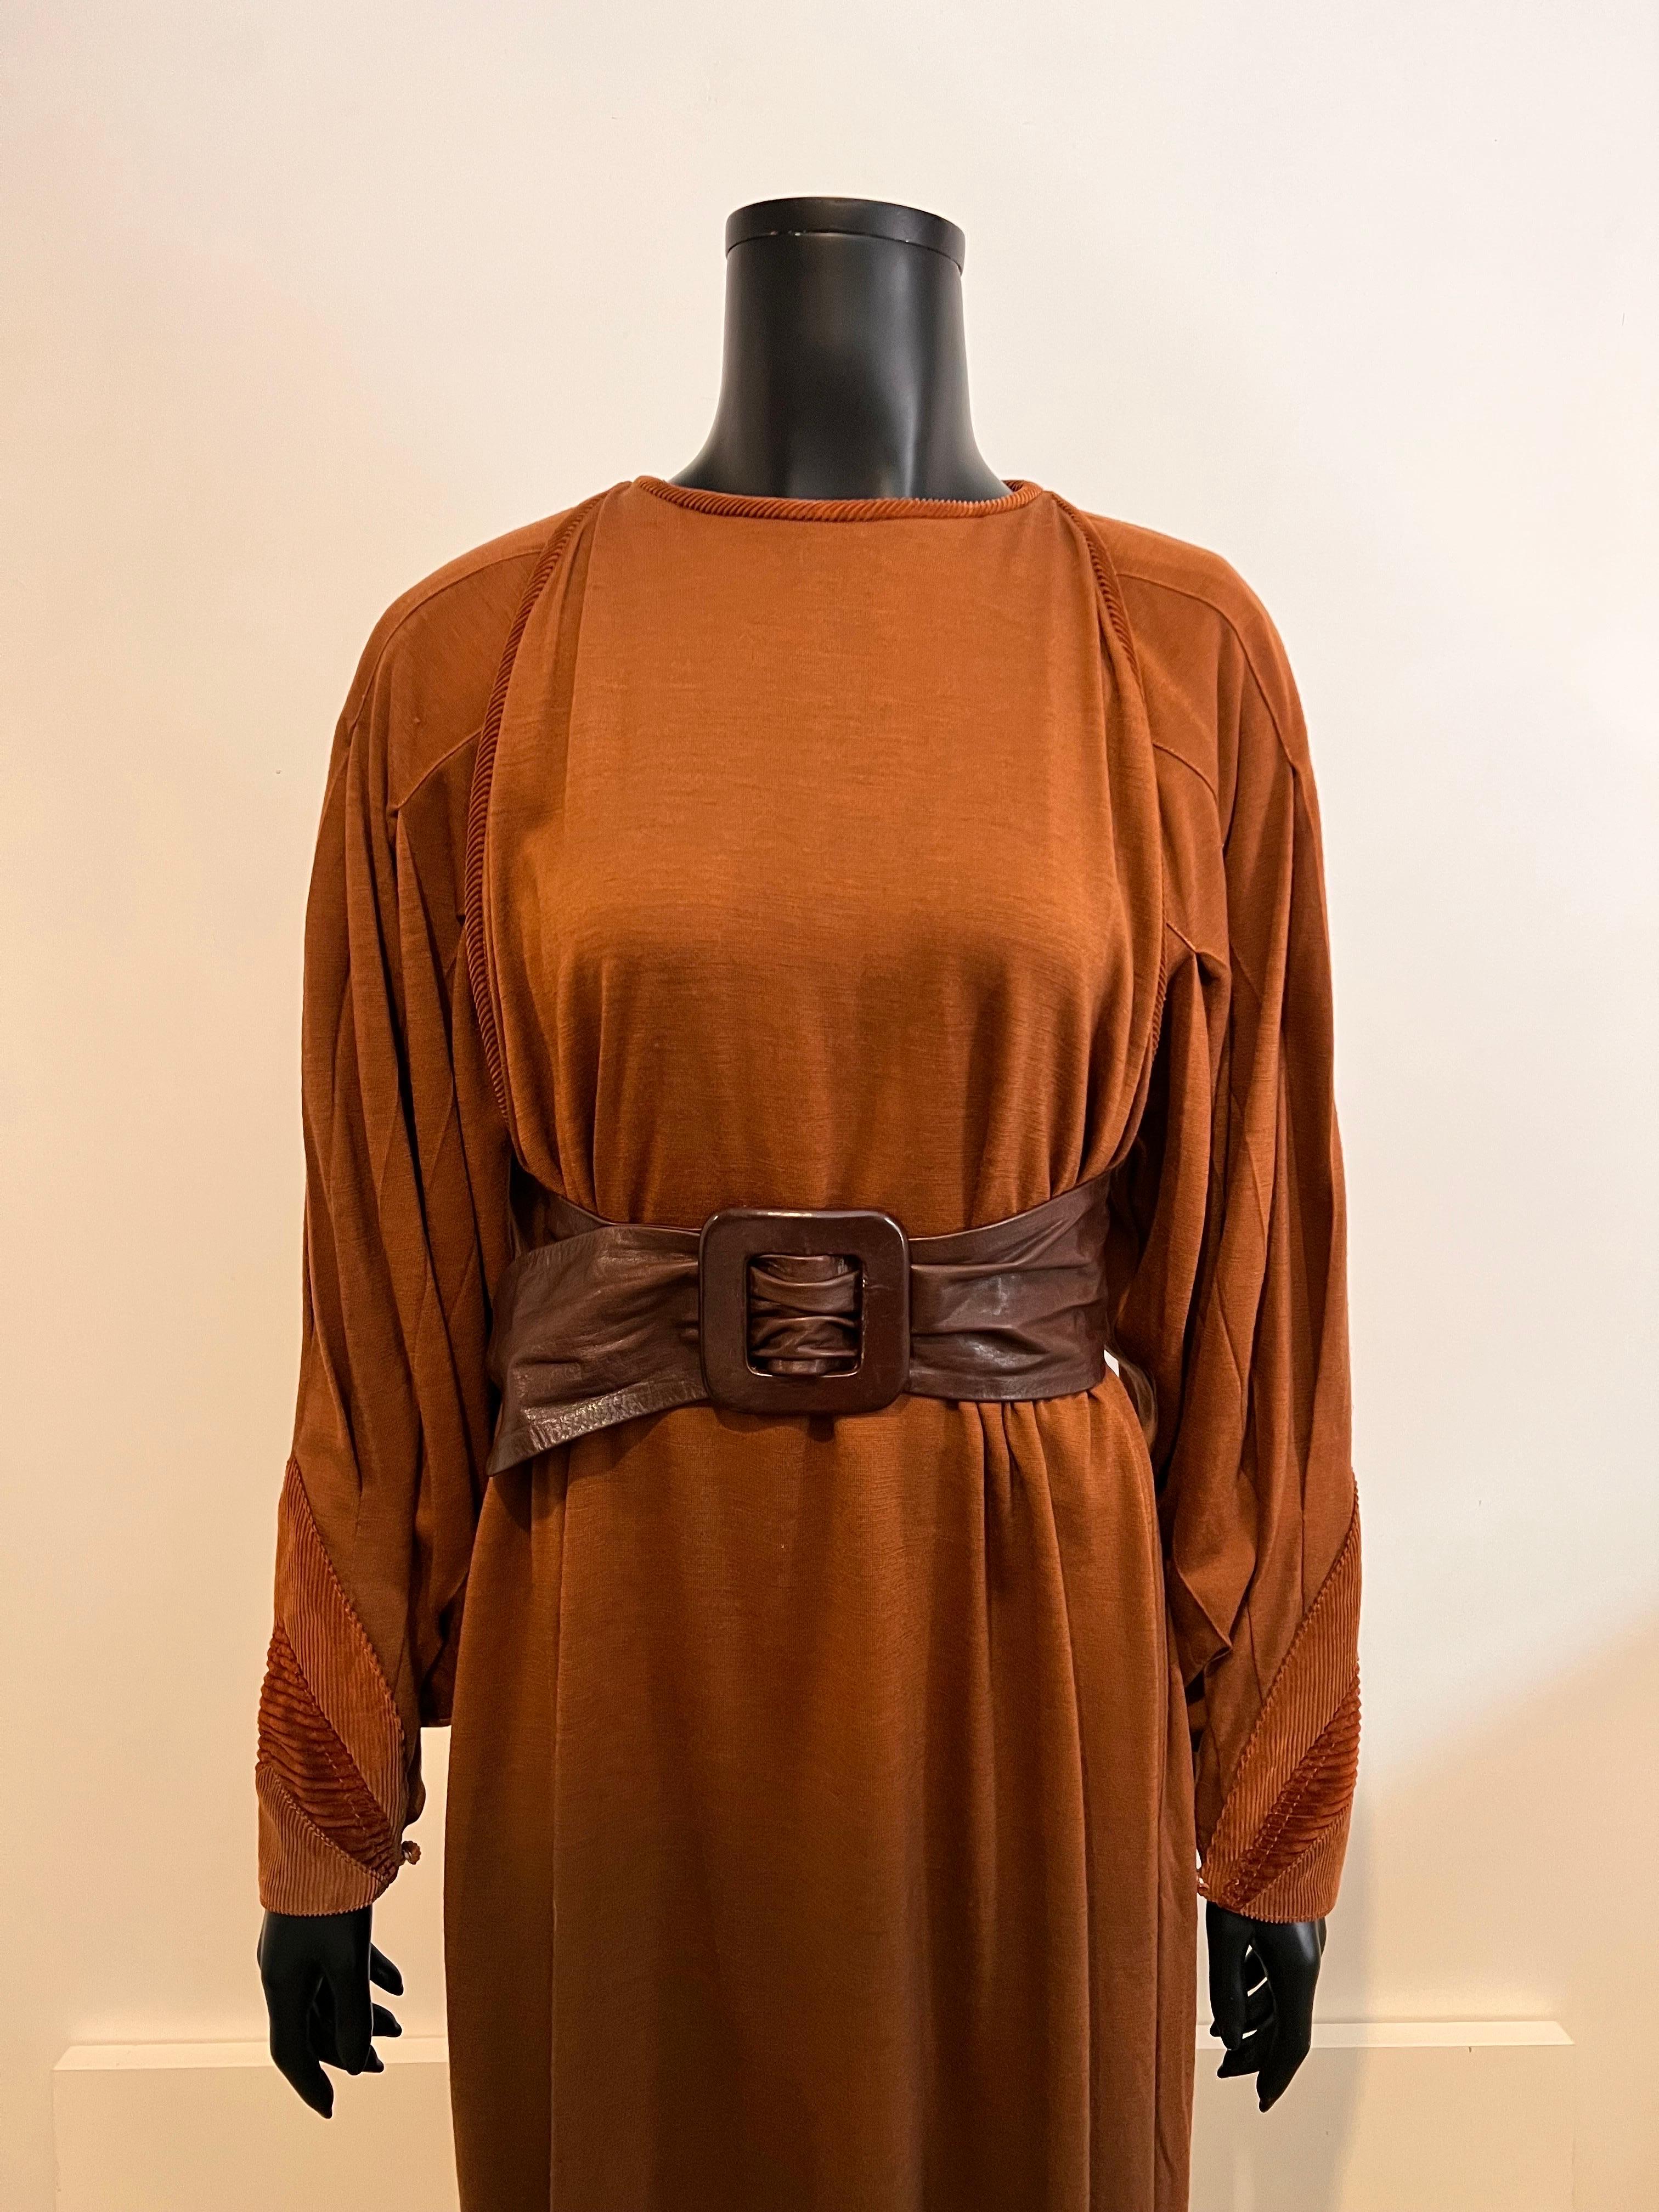 Vintage 1980’s Callaghan wool jersey dress with corduroy detail & leather belt  In Excellent Condition For Sale In COLLINGWOOD, AU